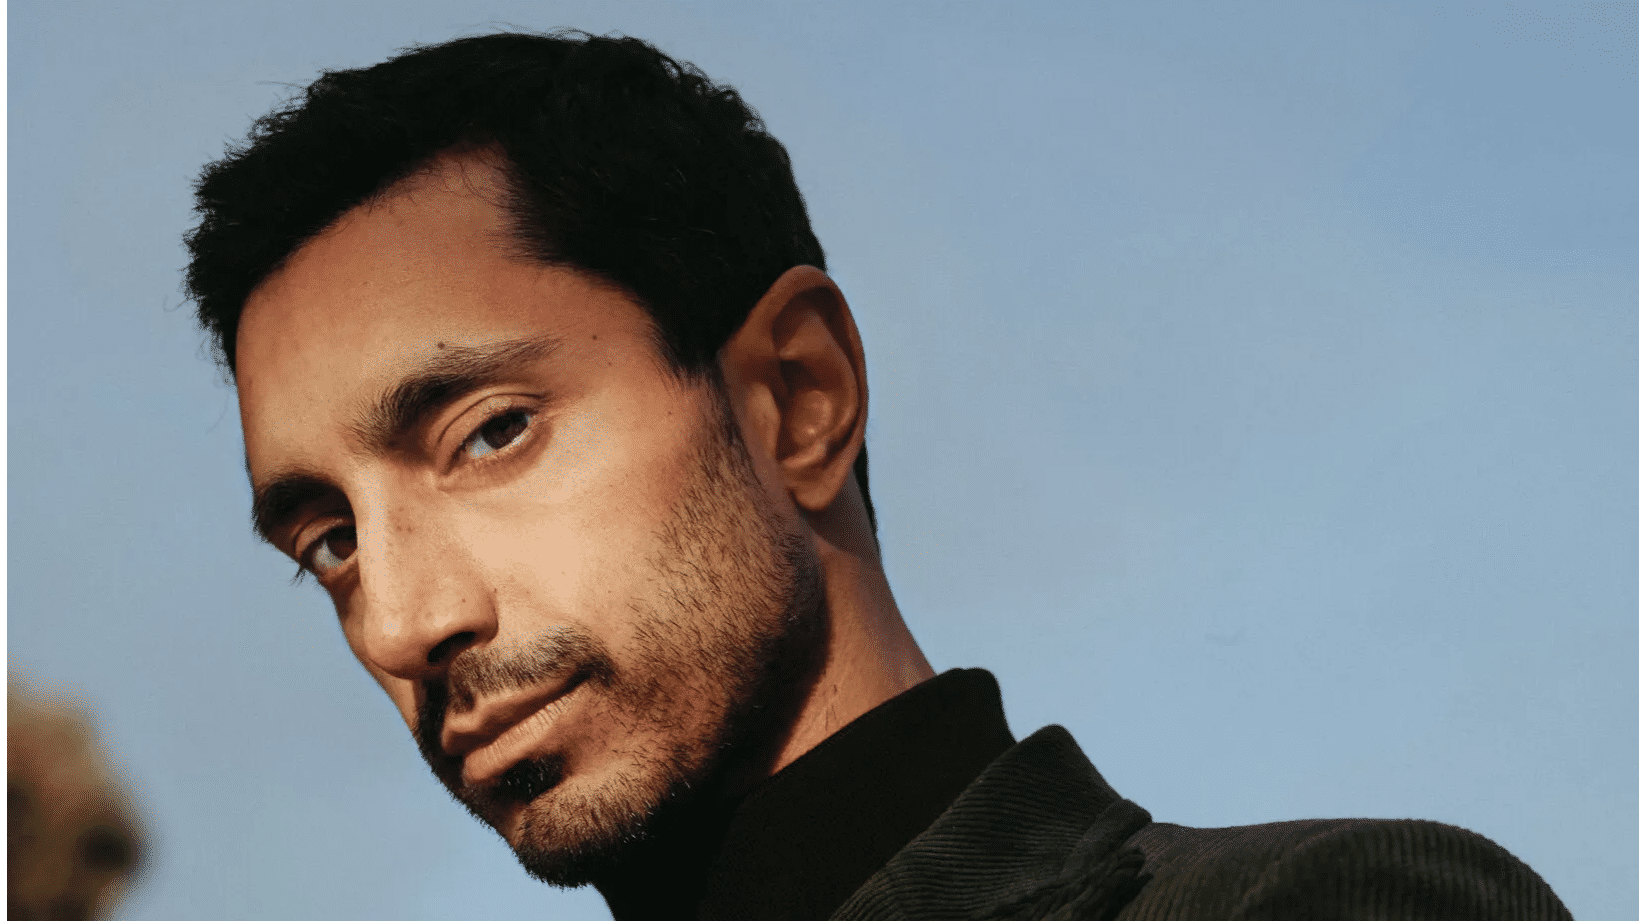 They would say kebab, smelly: Oscar-nominated actor Riz Ahmed recalls ‘racist digs’